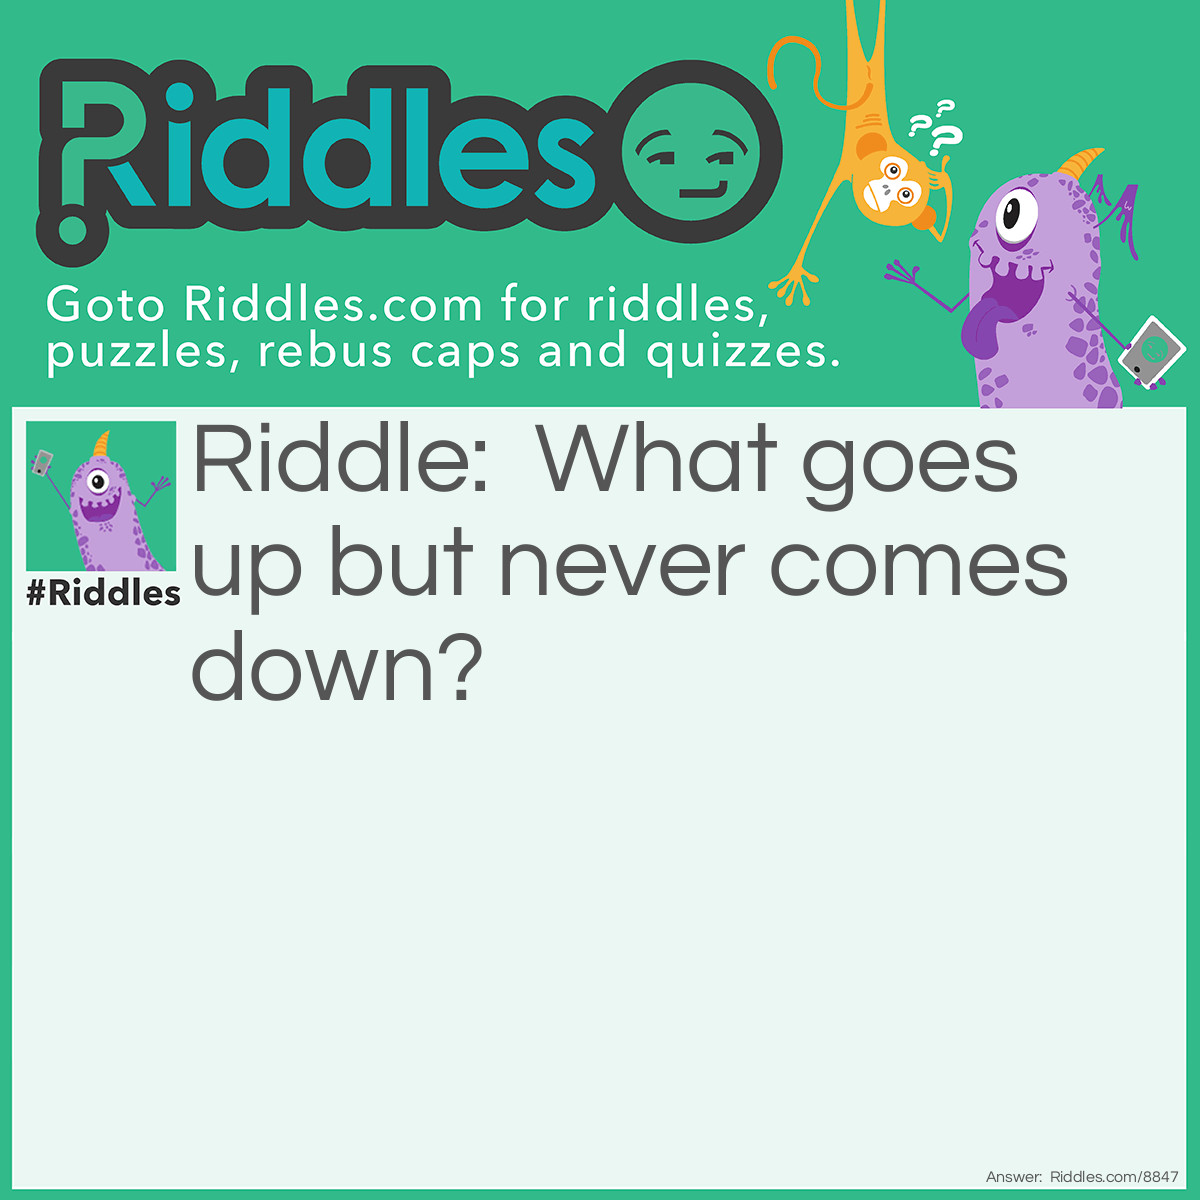 Riddle: What goes up but never comes down? Answer: Your Age.